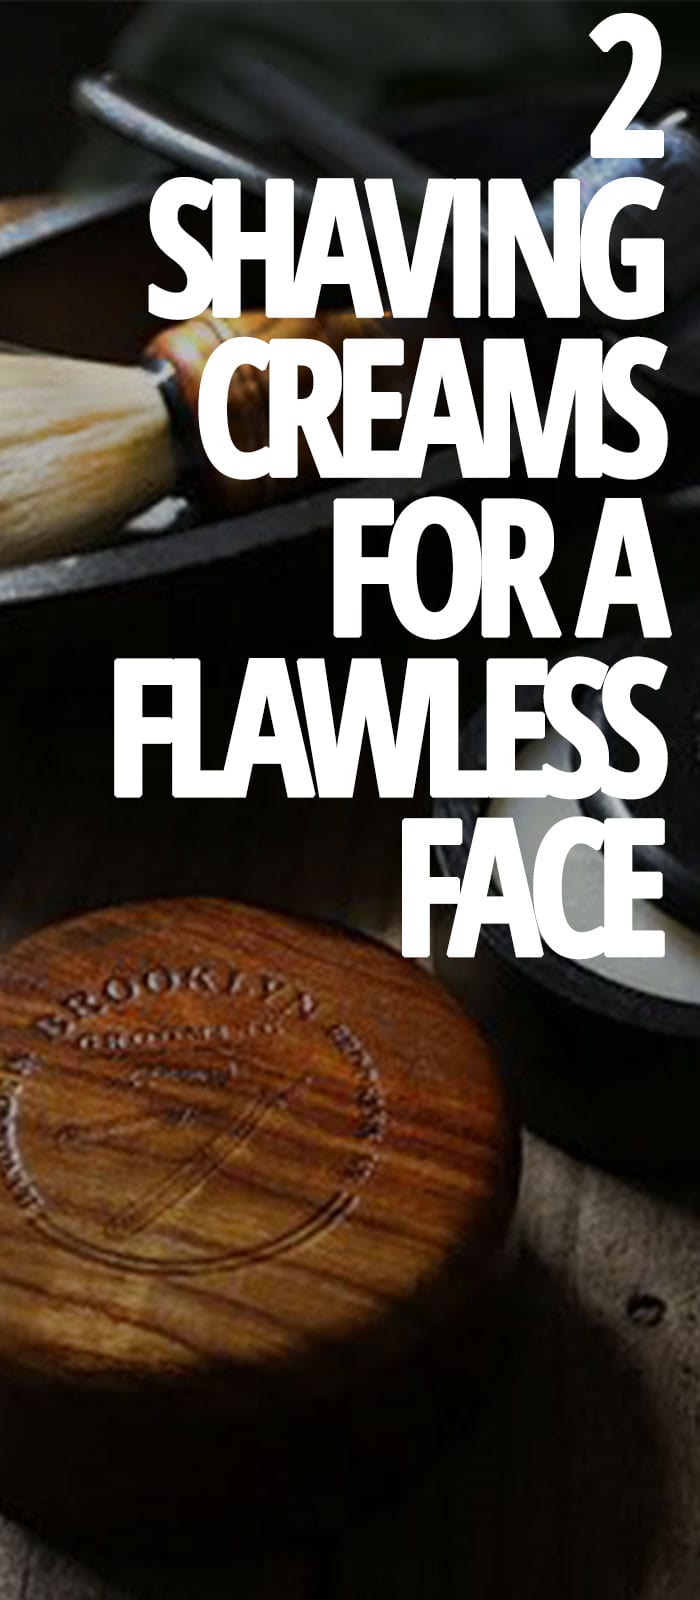 SHAVING-CREAMS-FOR-A-FLAWLESS-FACE